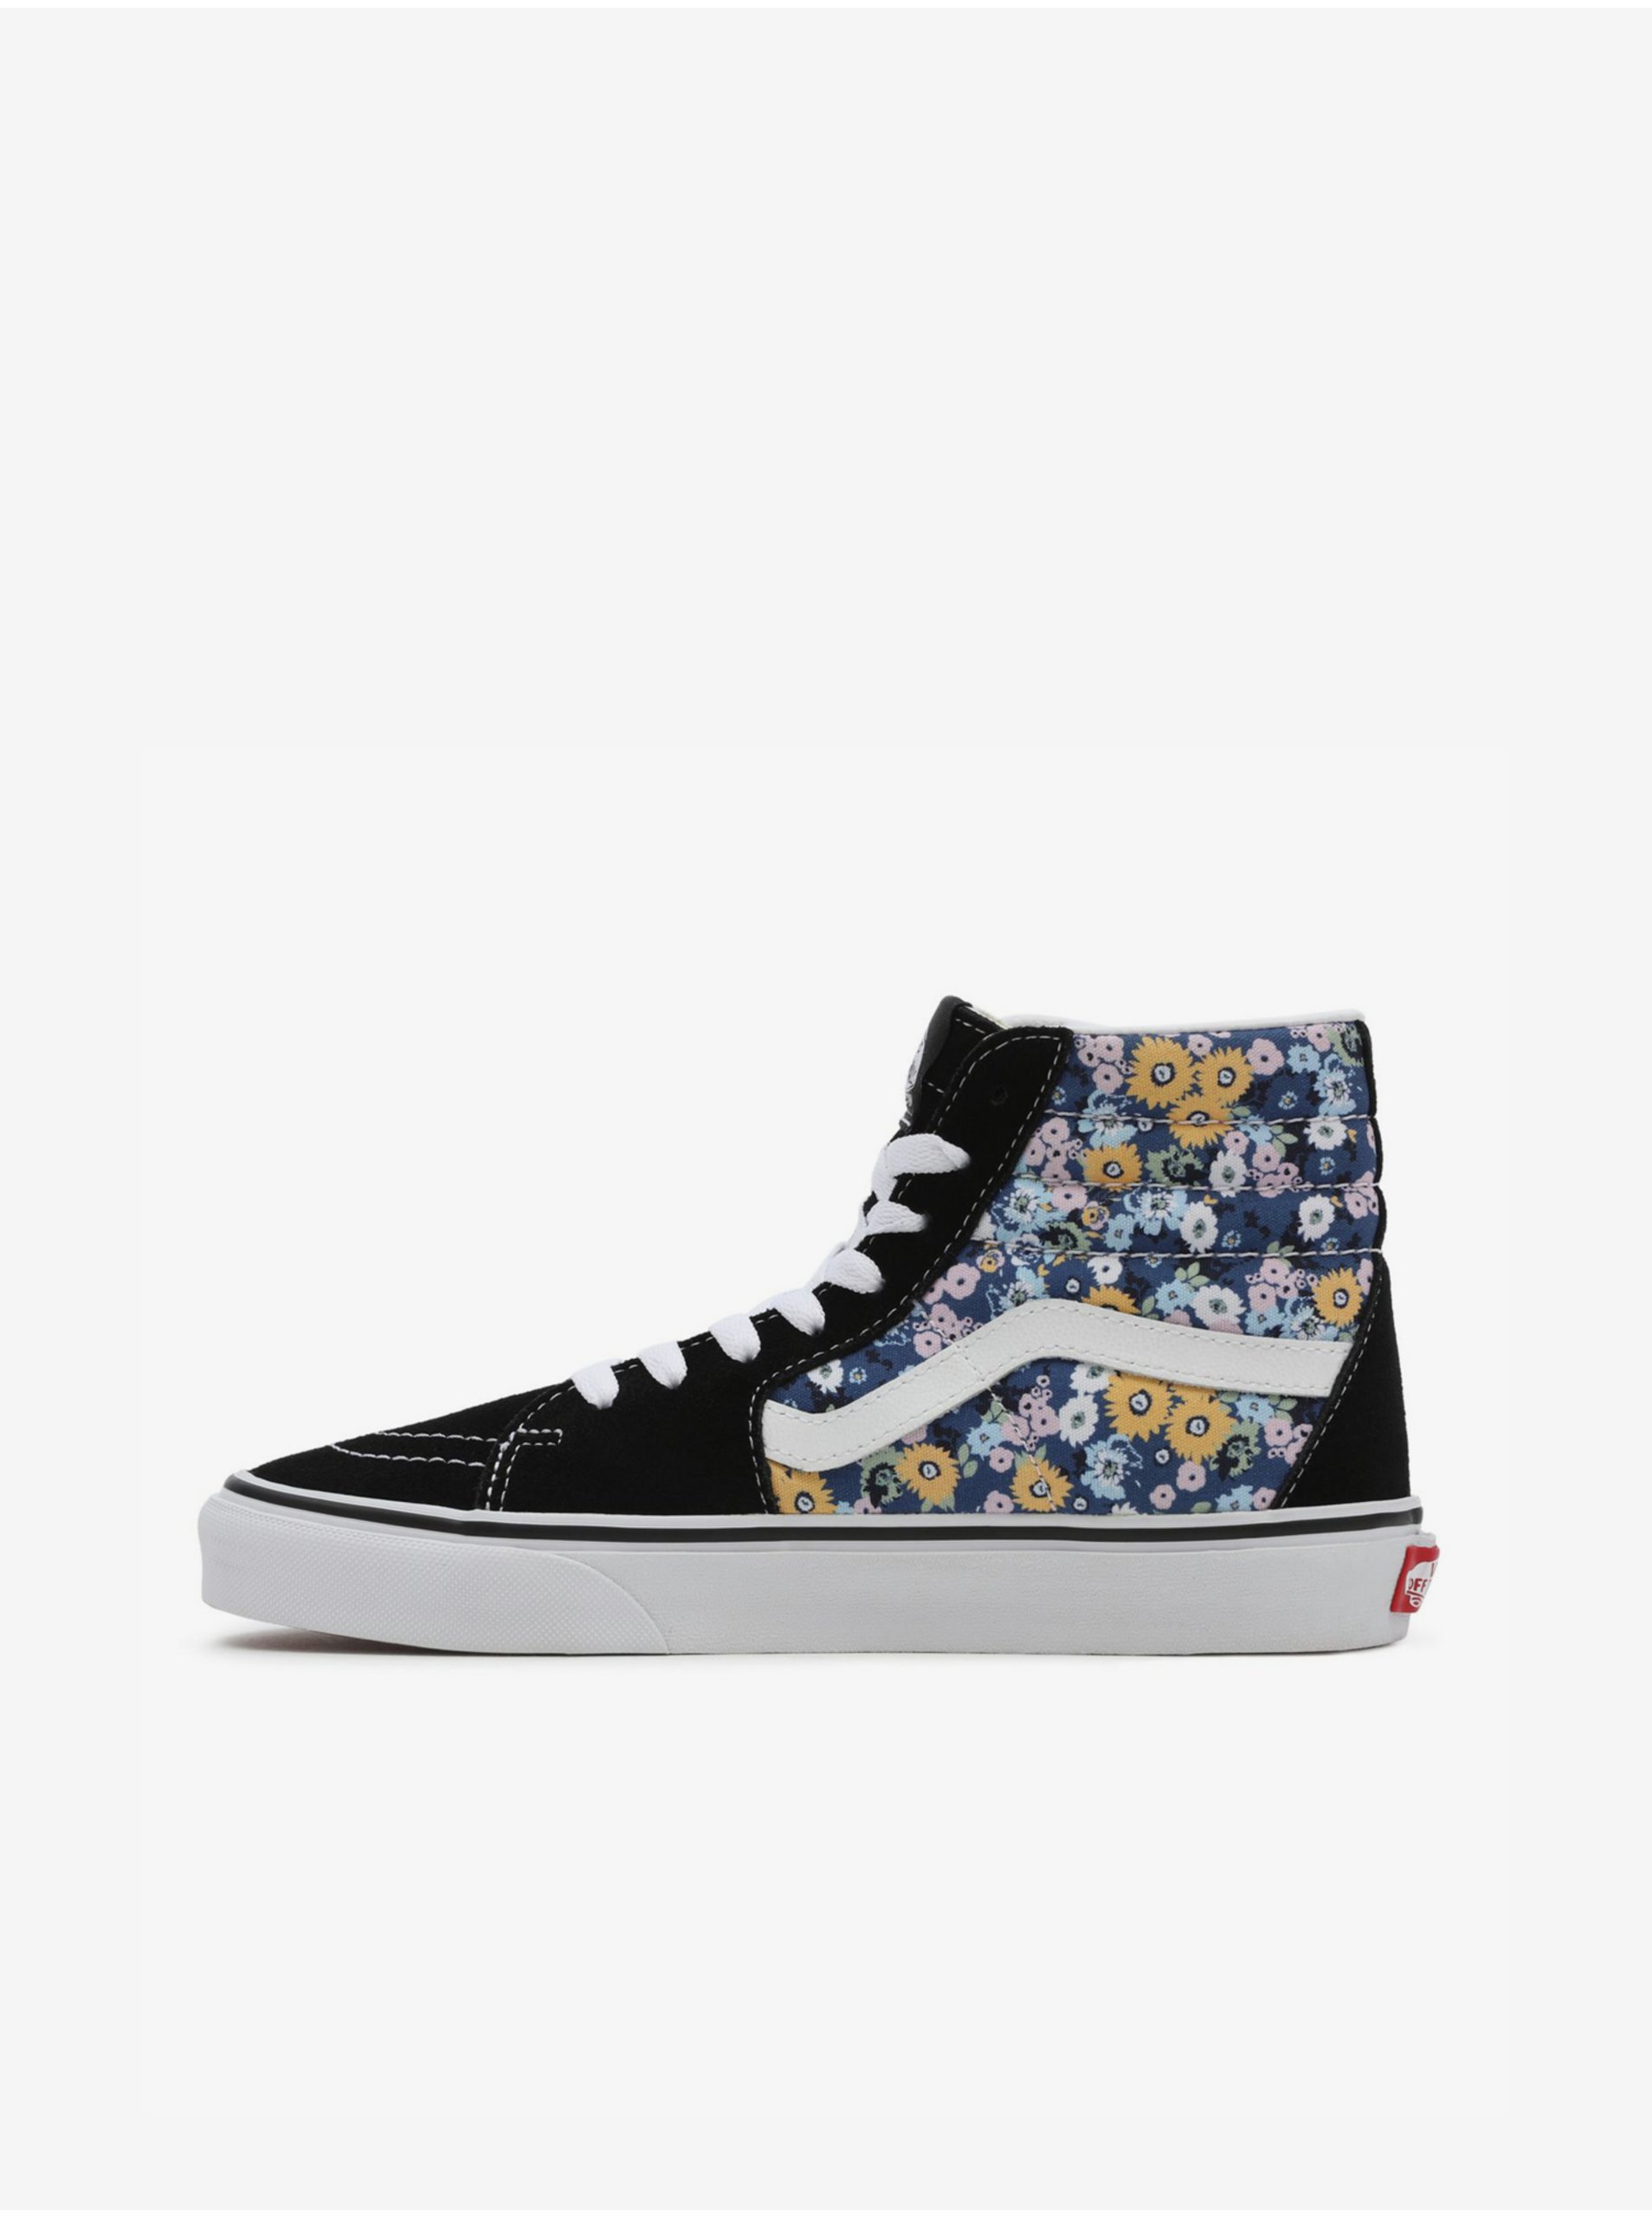 Vans Blue-Black Women Patterned Ankle Sneakers with Suede Details - Women